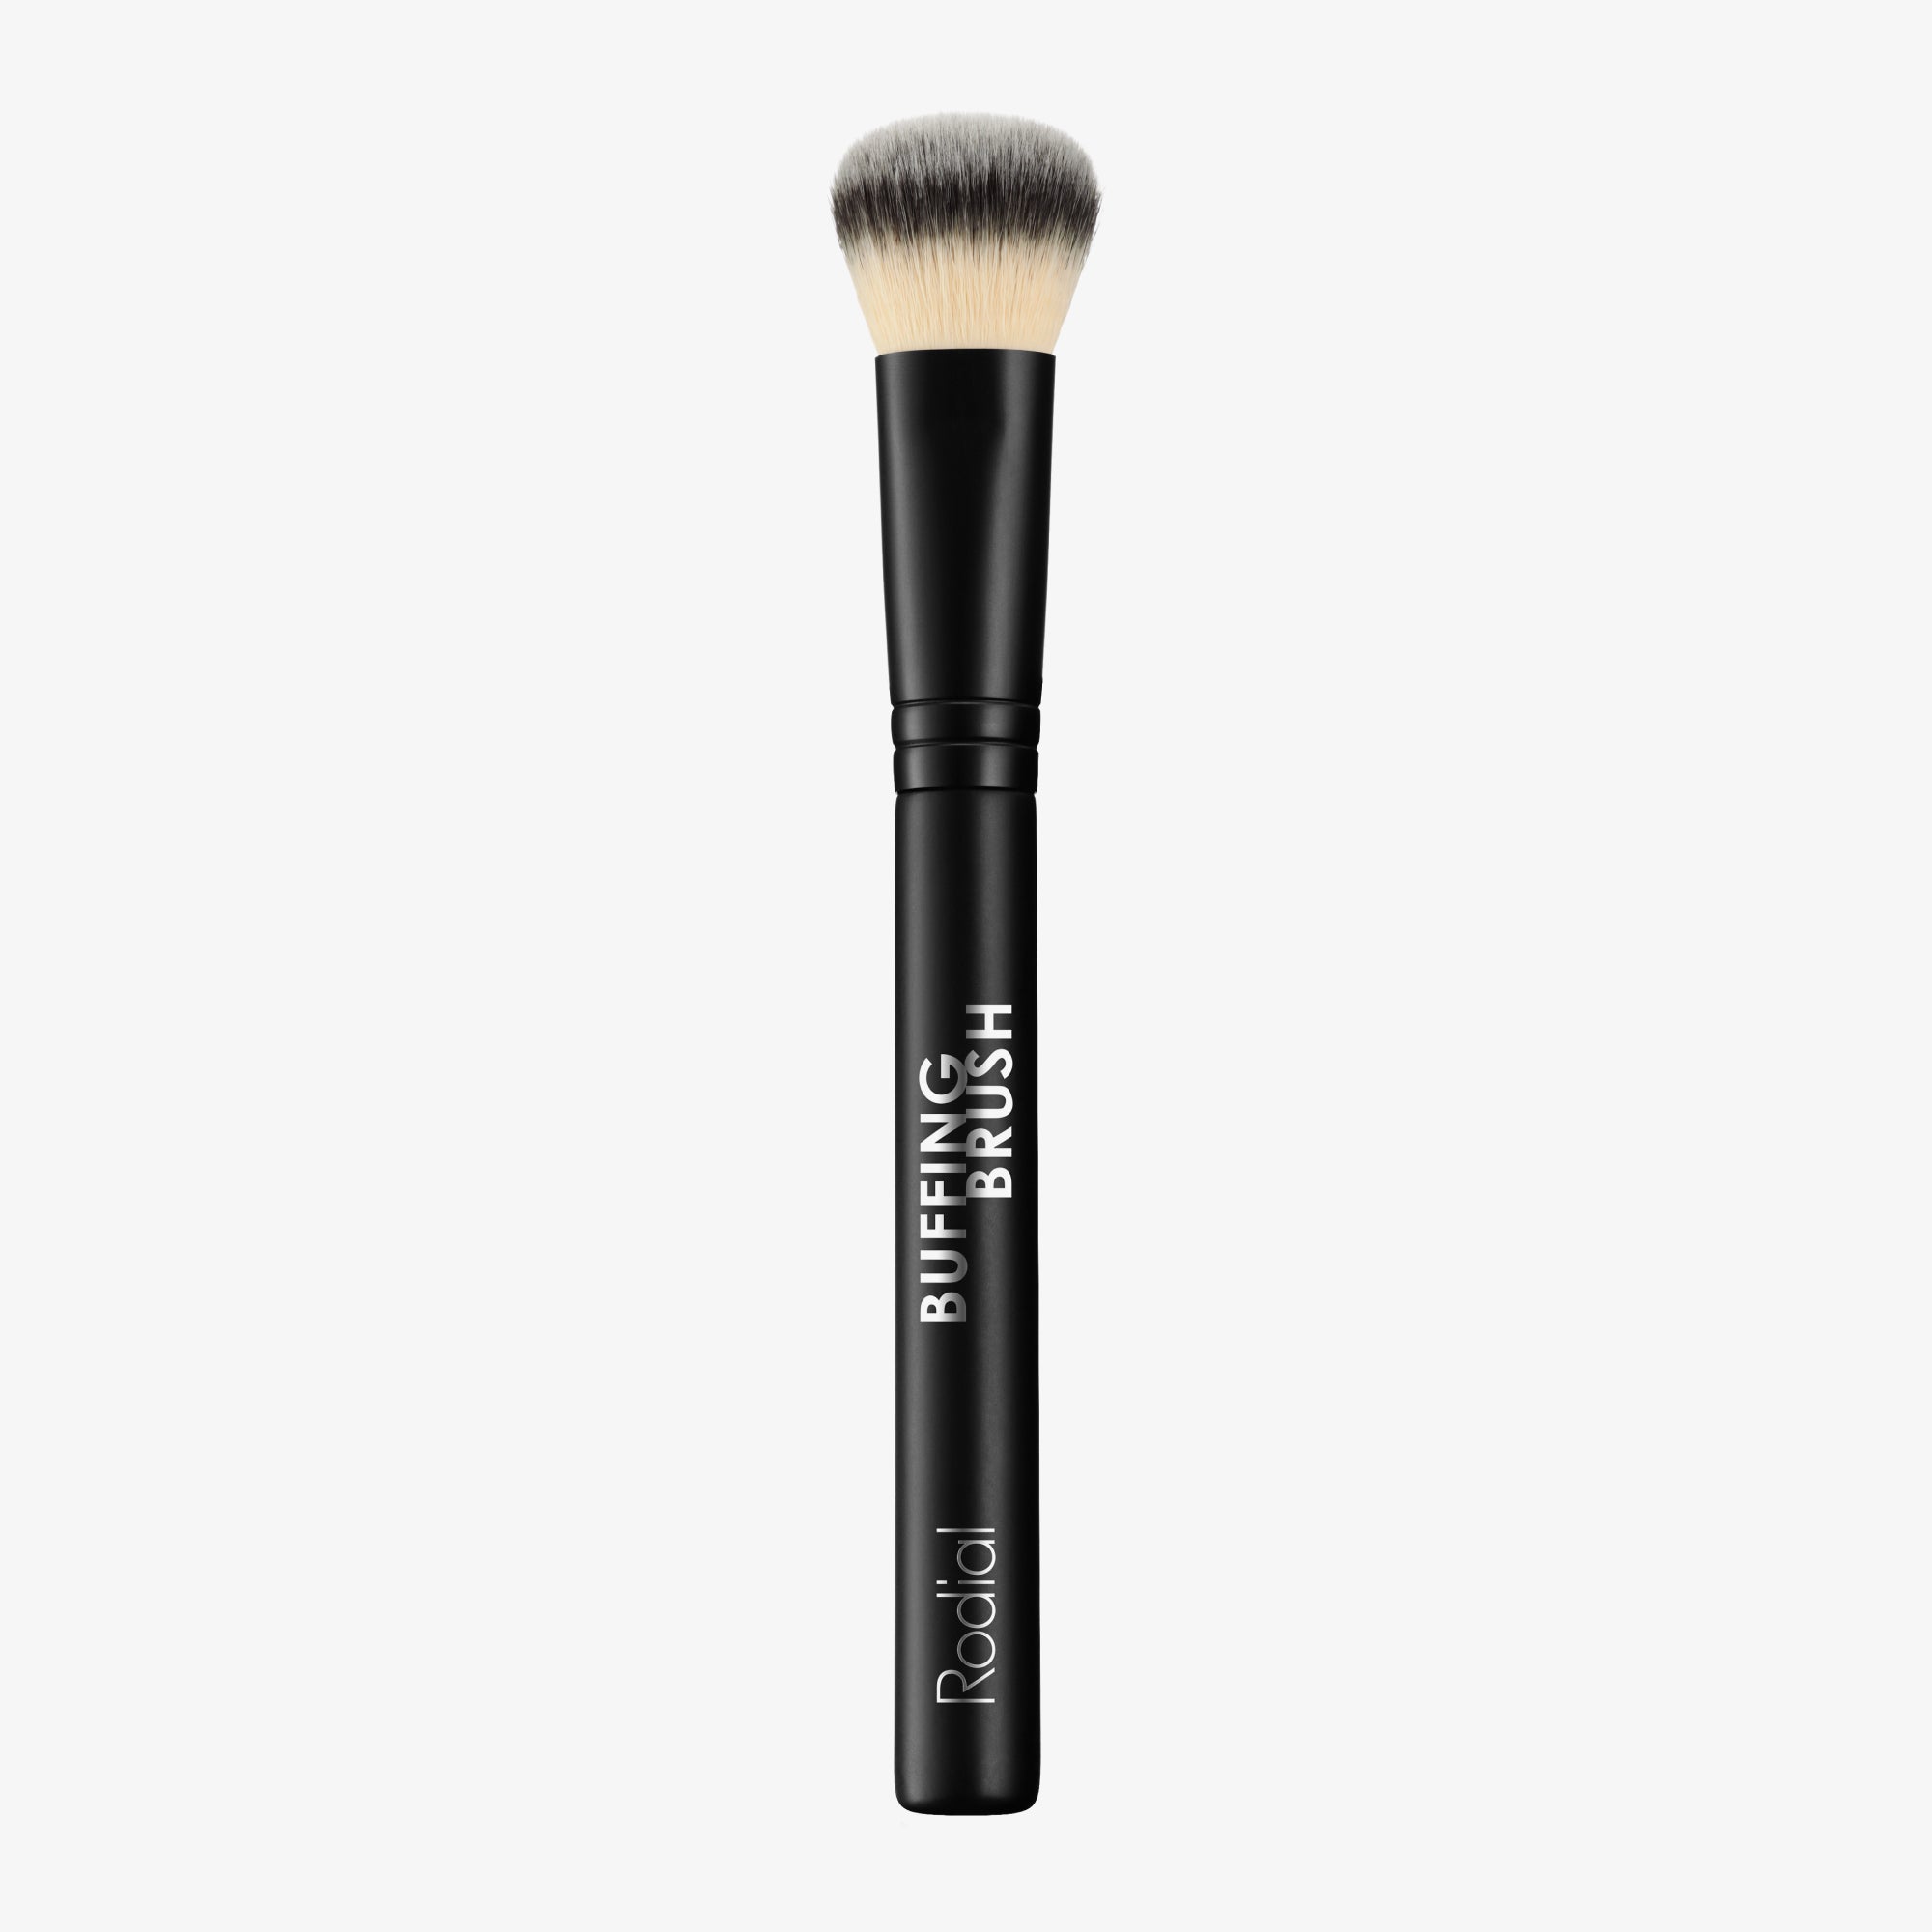 The Buffing Brush Makeup Brushes